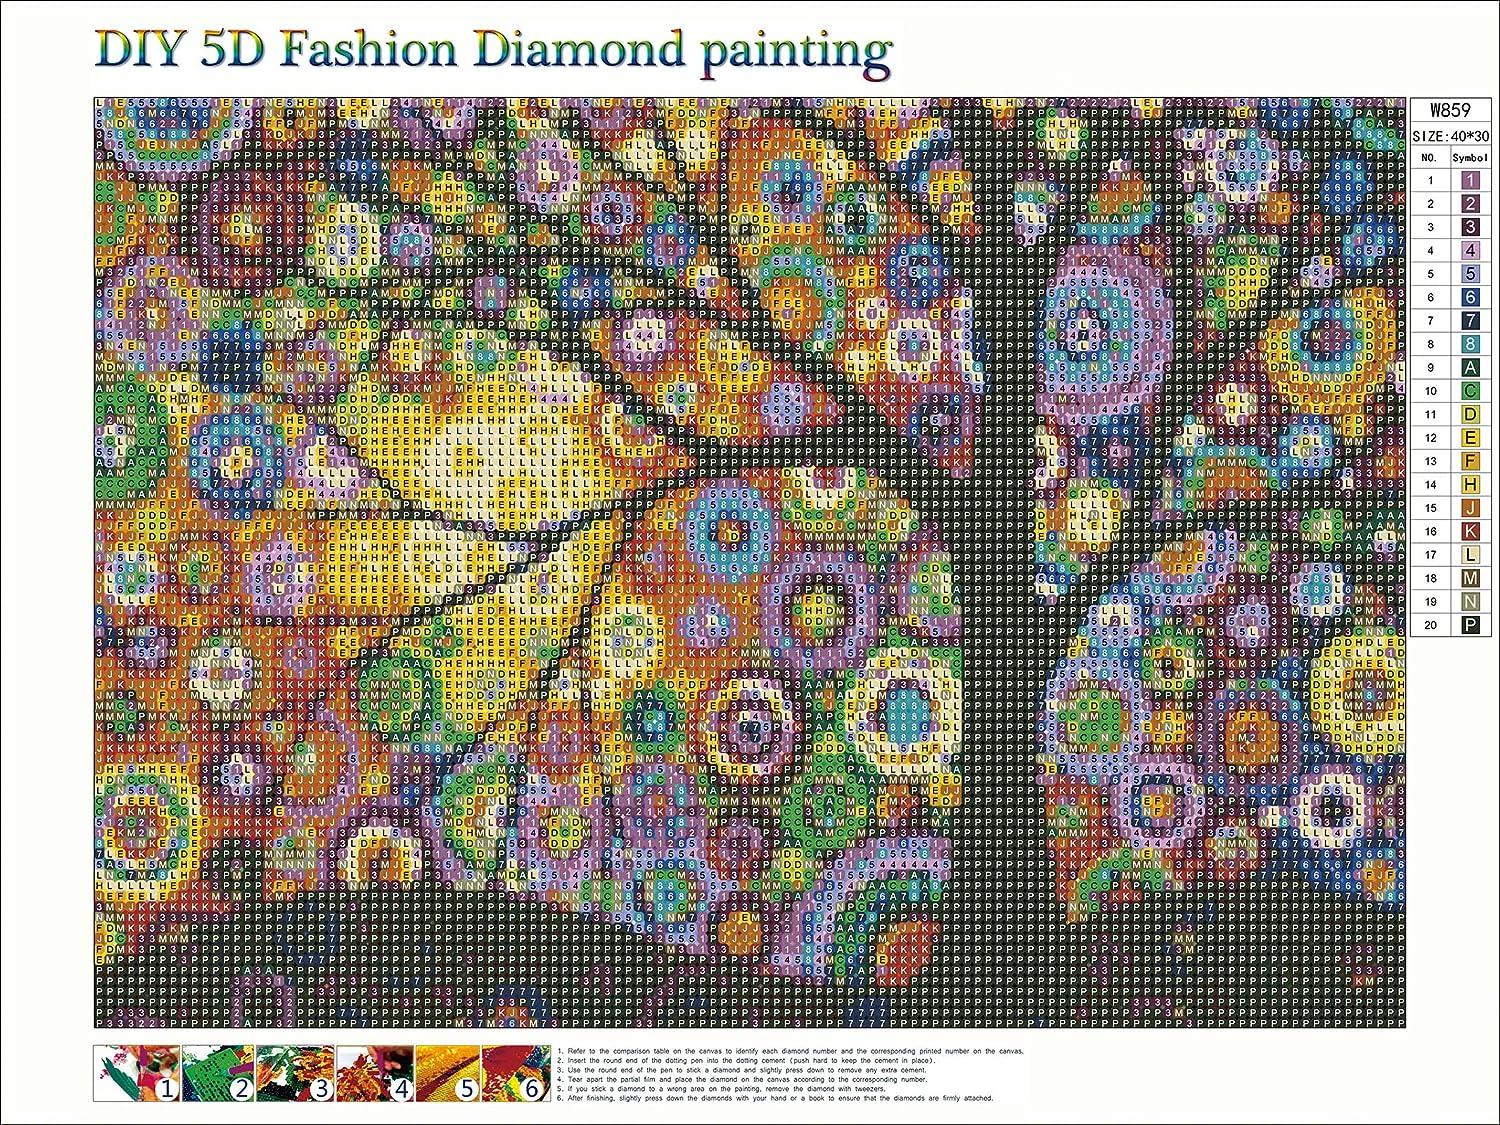 MXJSUA DIY 5D Diamond Painting Cat by Number Kits for Adults